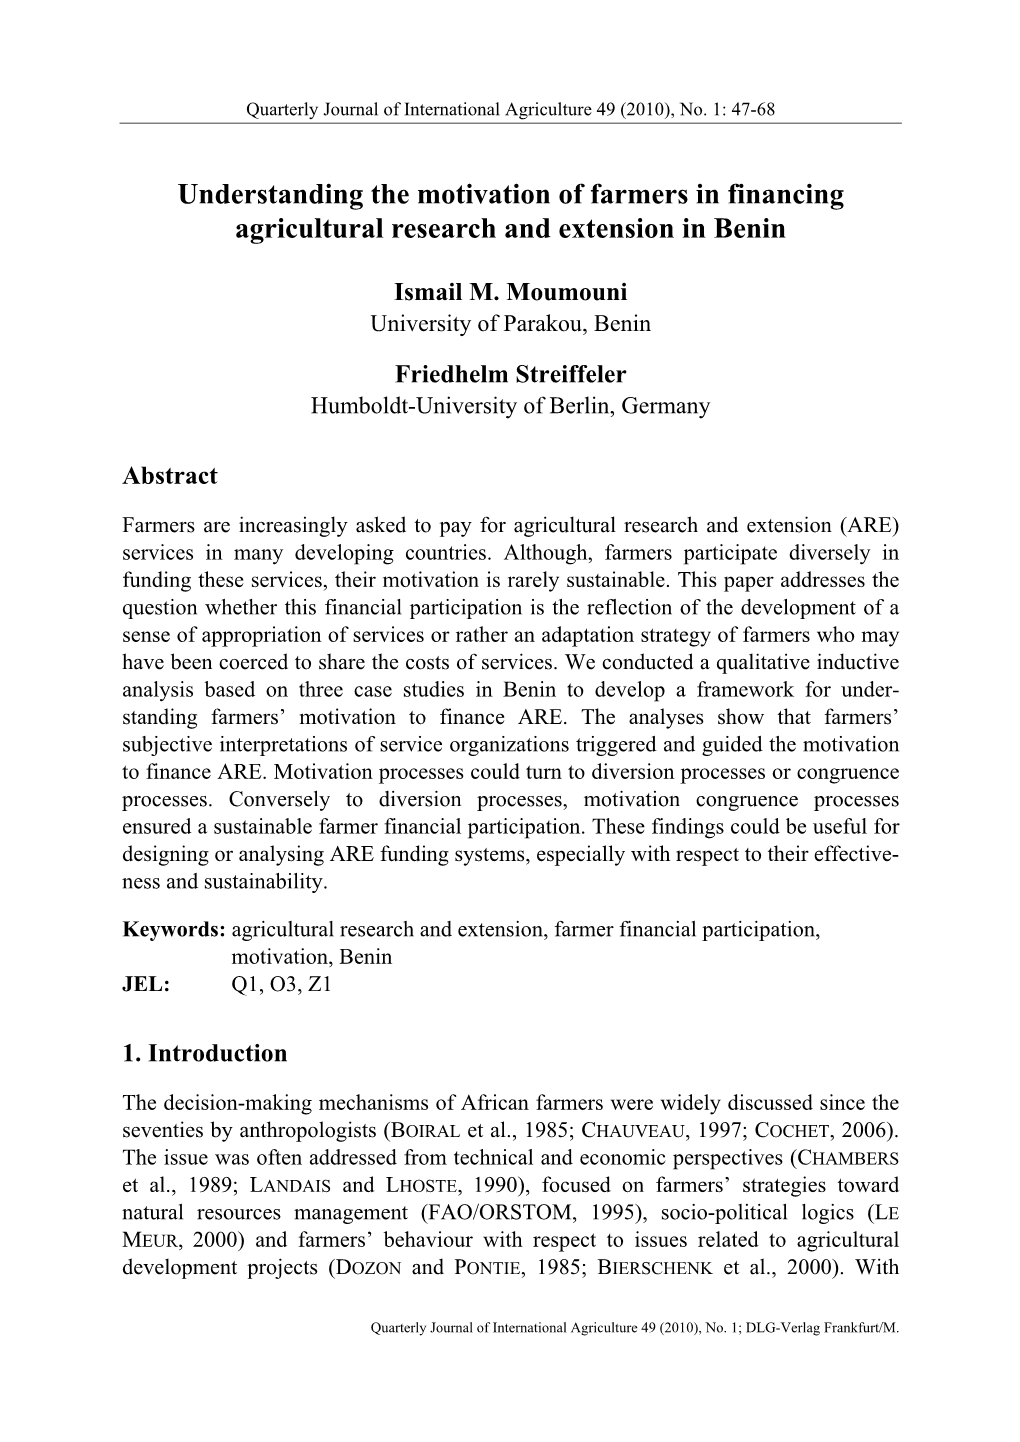 Understanding the Motivation of Farmers in Financing Agricultural Research and Extension in Benin